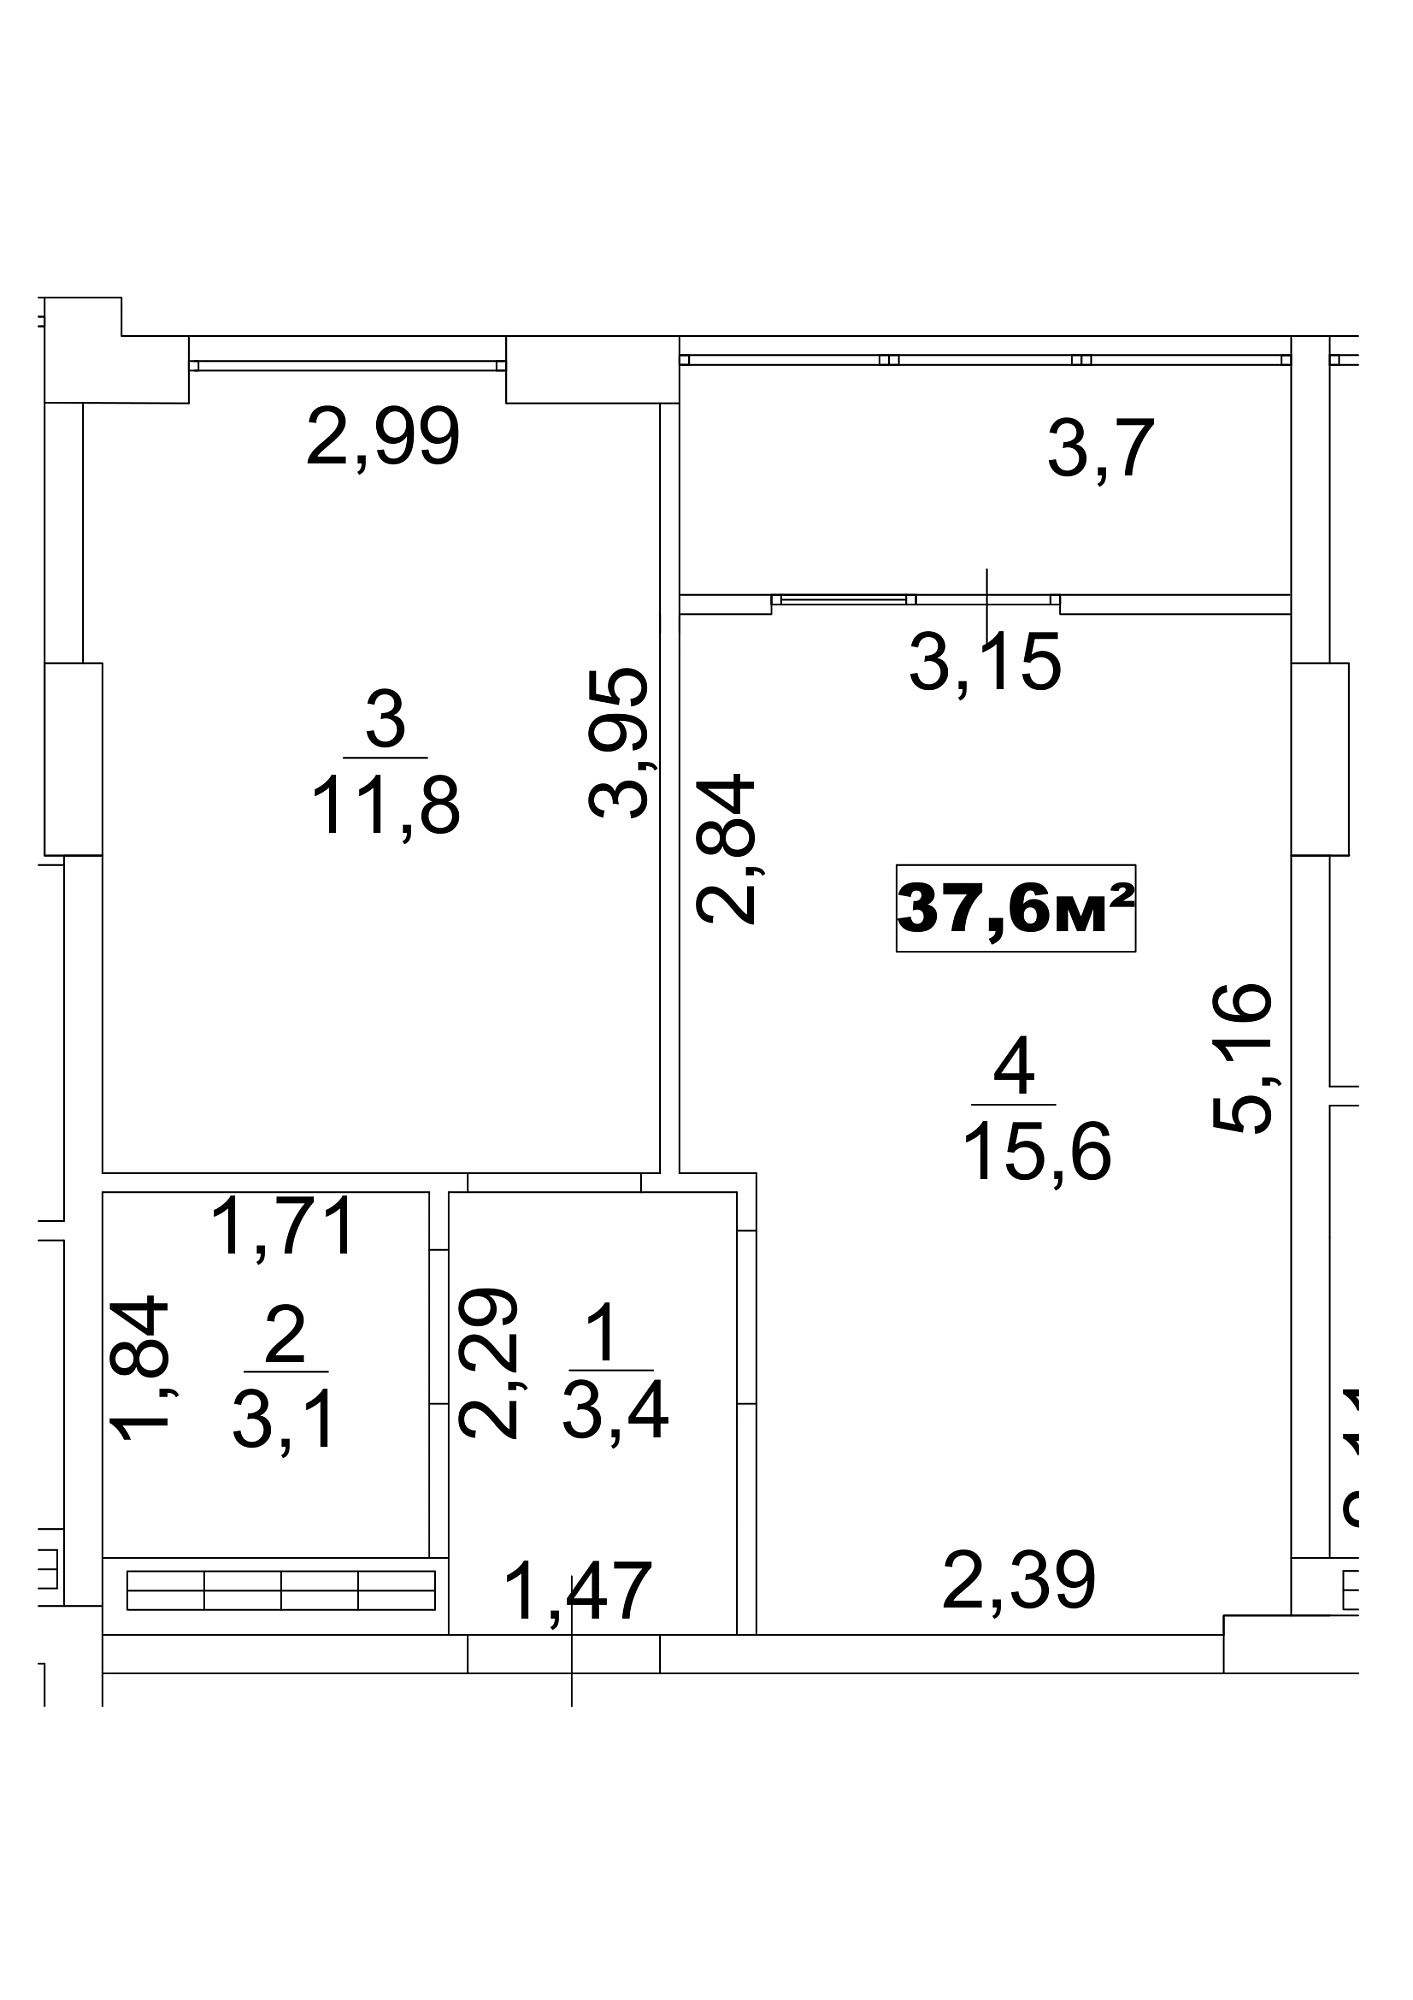 Planning 1-rm flats area 37.6m2, AB-13-05/00039.